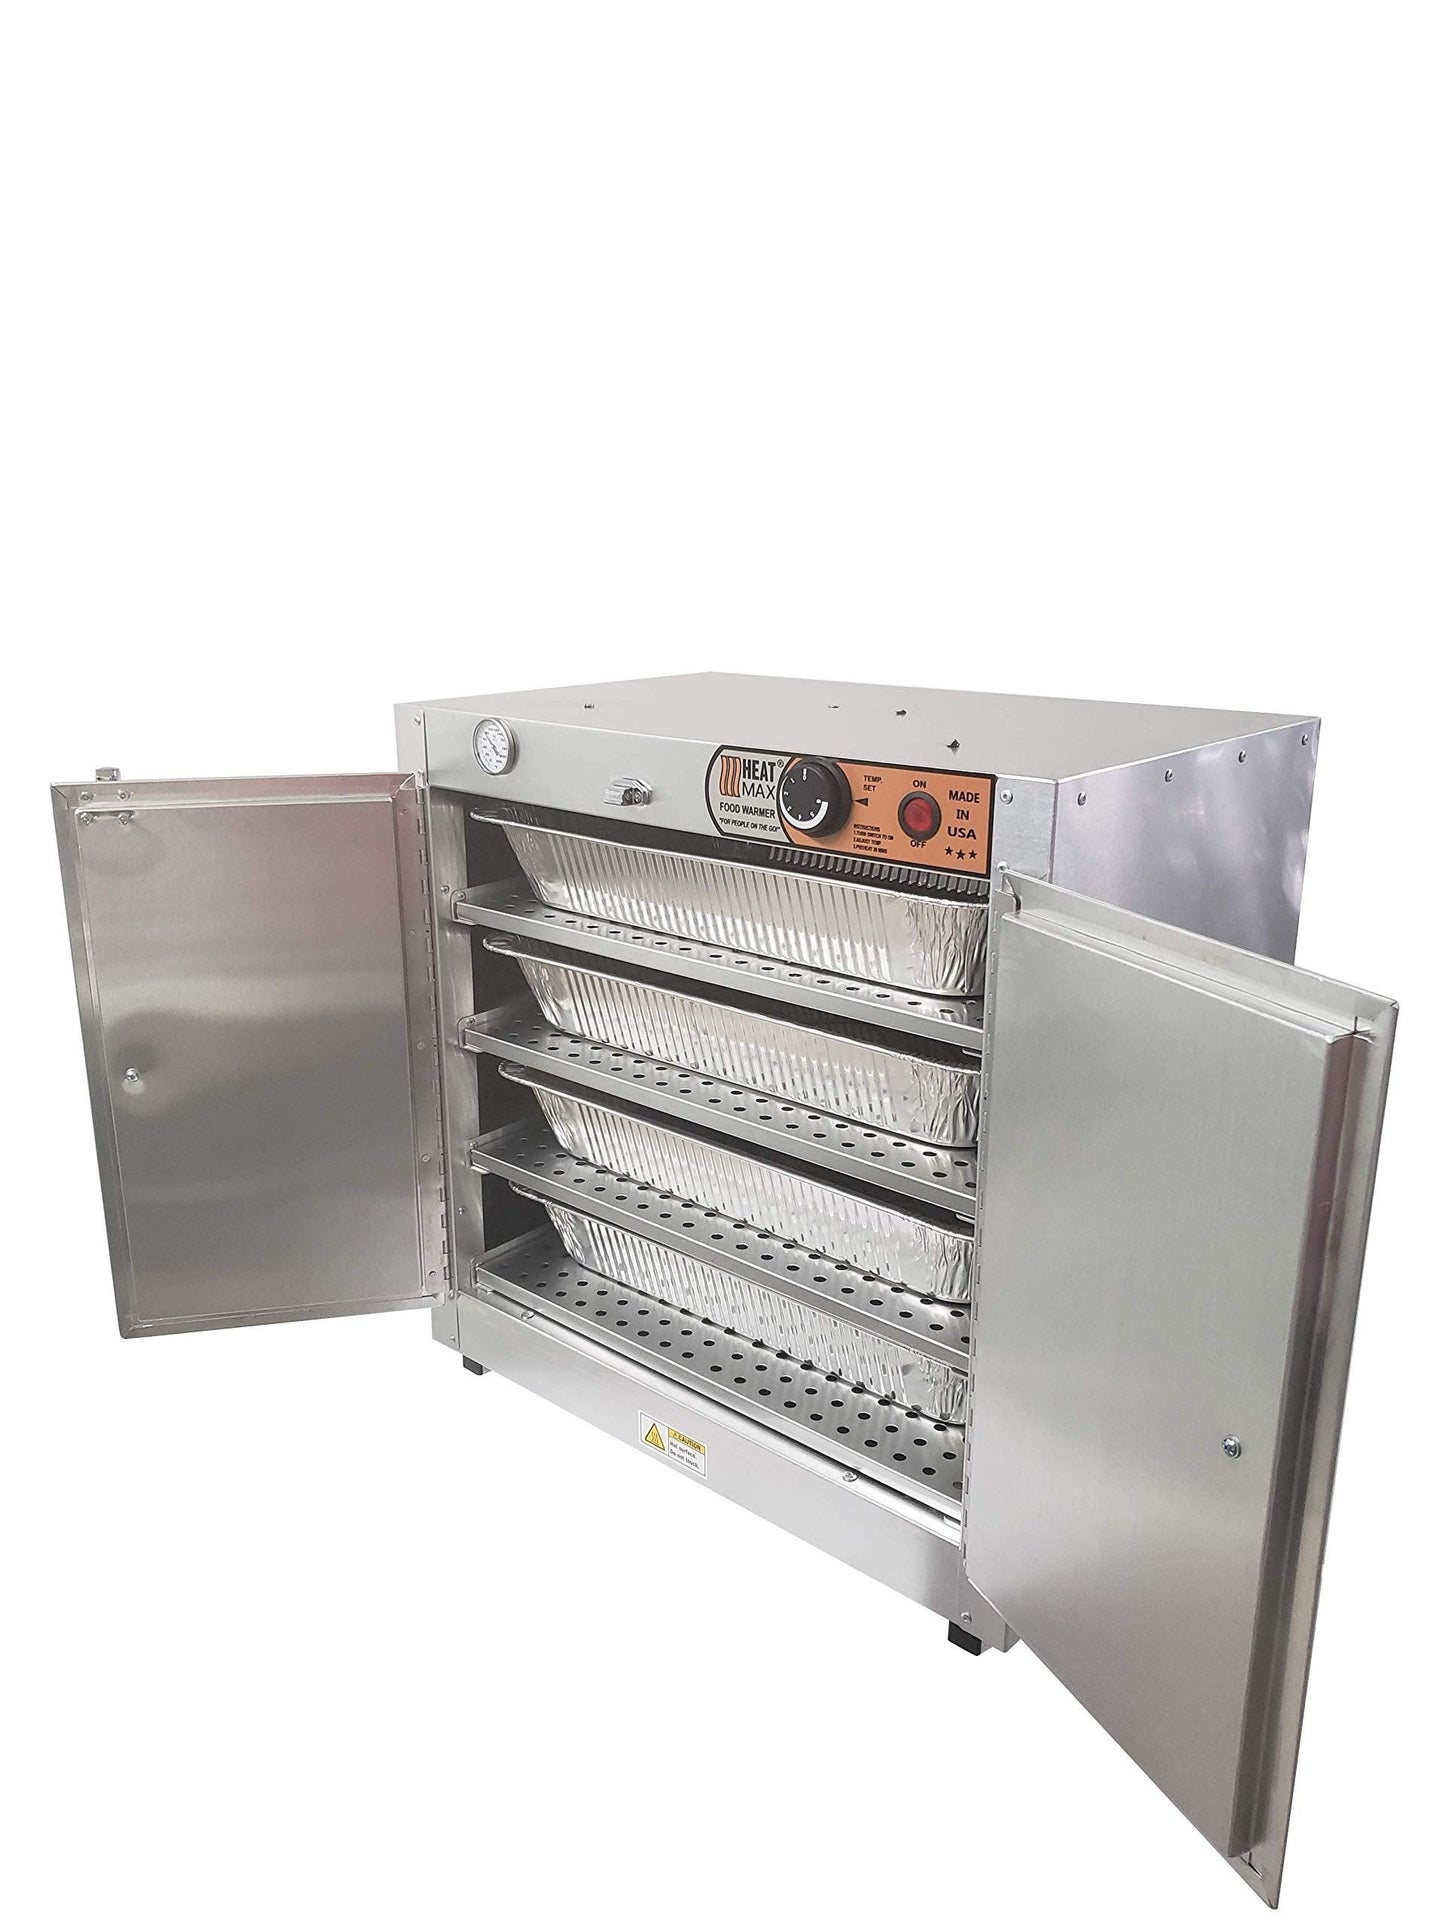 HeatMax 251524 Catering and Events Food Warmer with Water Tray, The Original and The Best, UL/NSF Certified for inspections, Made in USA with Service and Support, Great for Schools, Churches - CookCave